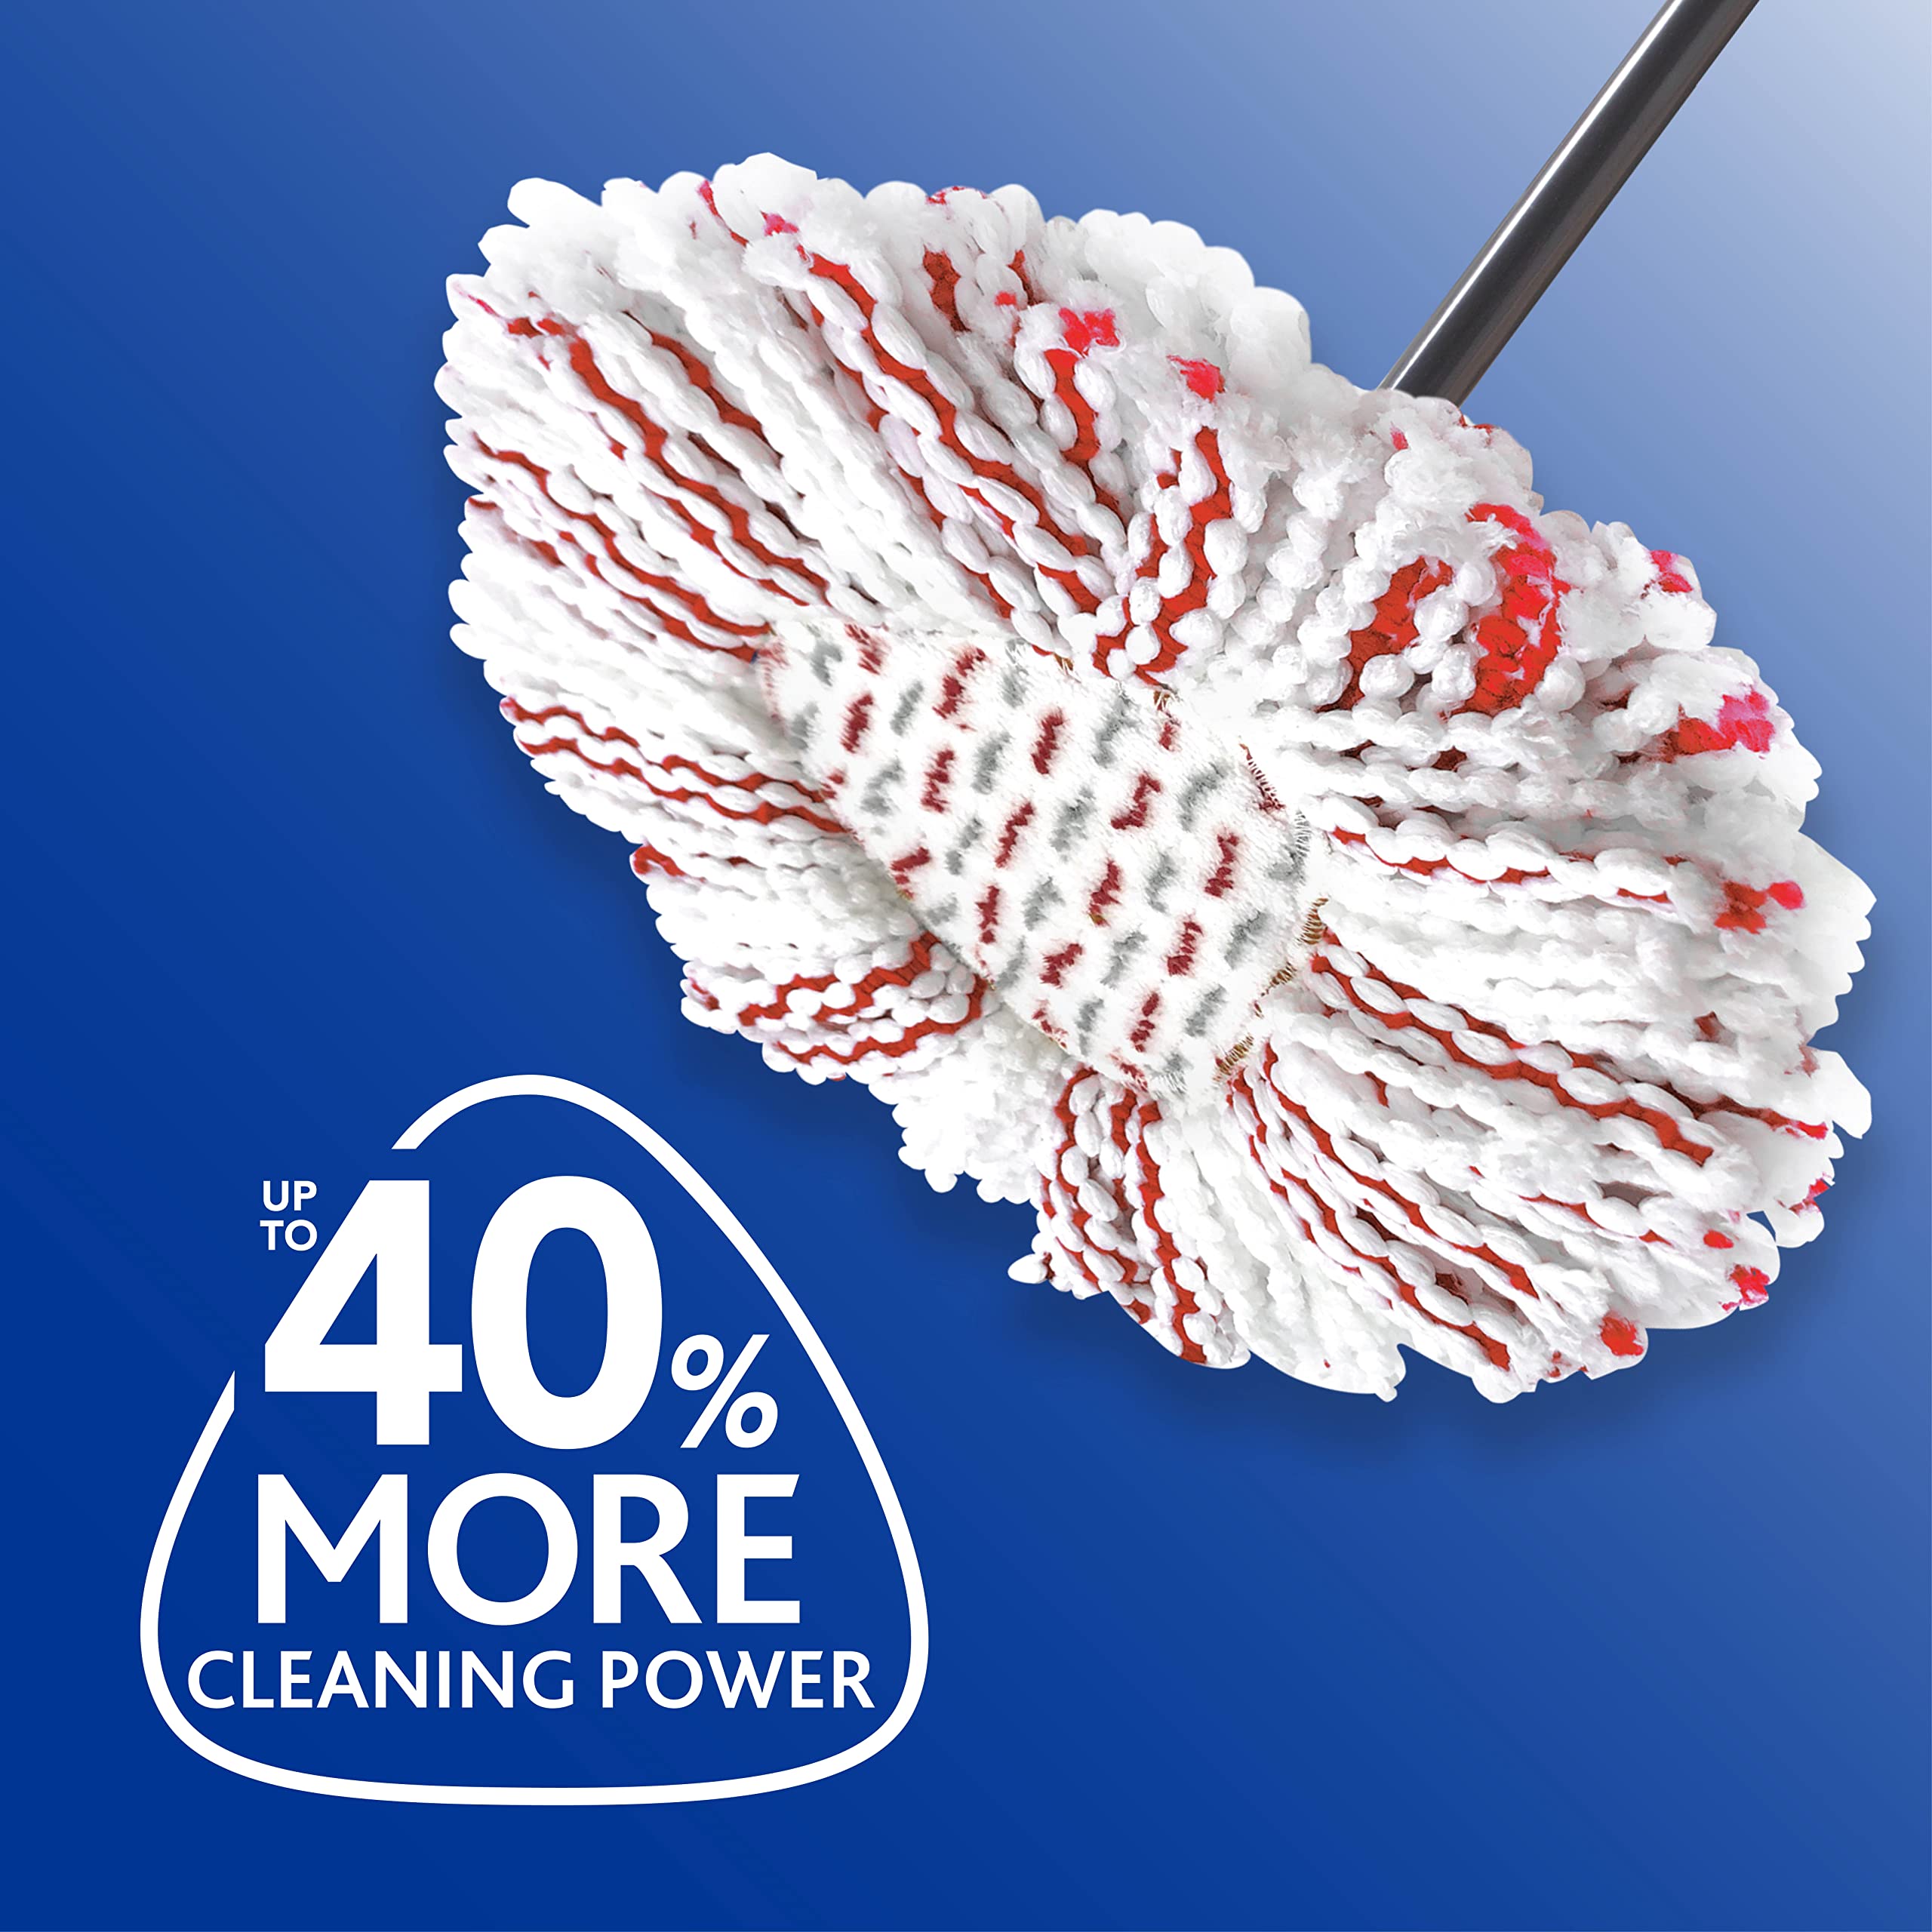 O-Cedar EasyWring Spin Mop Microfiber Refill (Pack of 4) and EasyWring Deep Clean Refill (4-Pack) | 40% More Cleaning Power | Microfiber Mop Refill Compatible with EasyWring Spin Mop & Bucket System